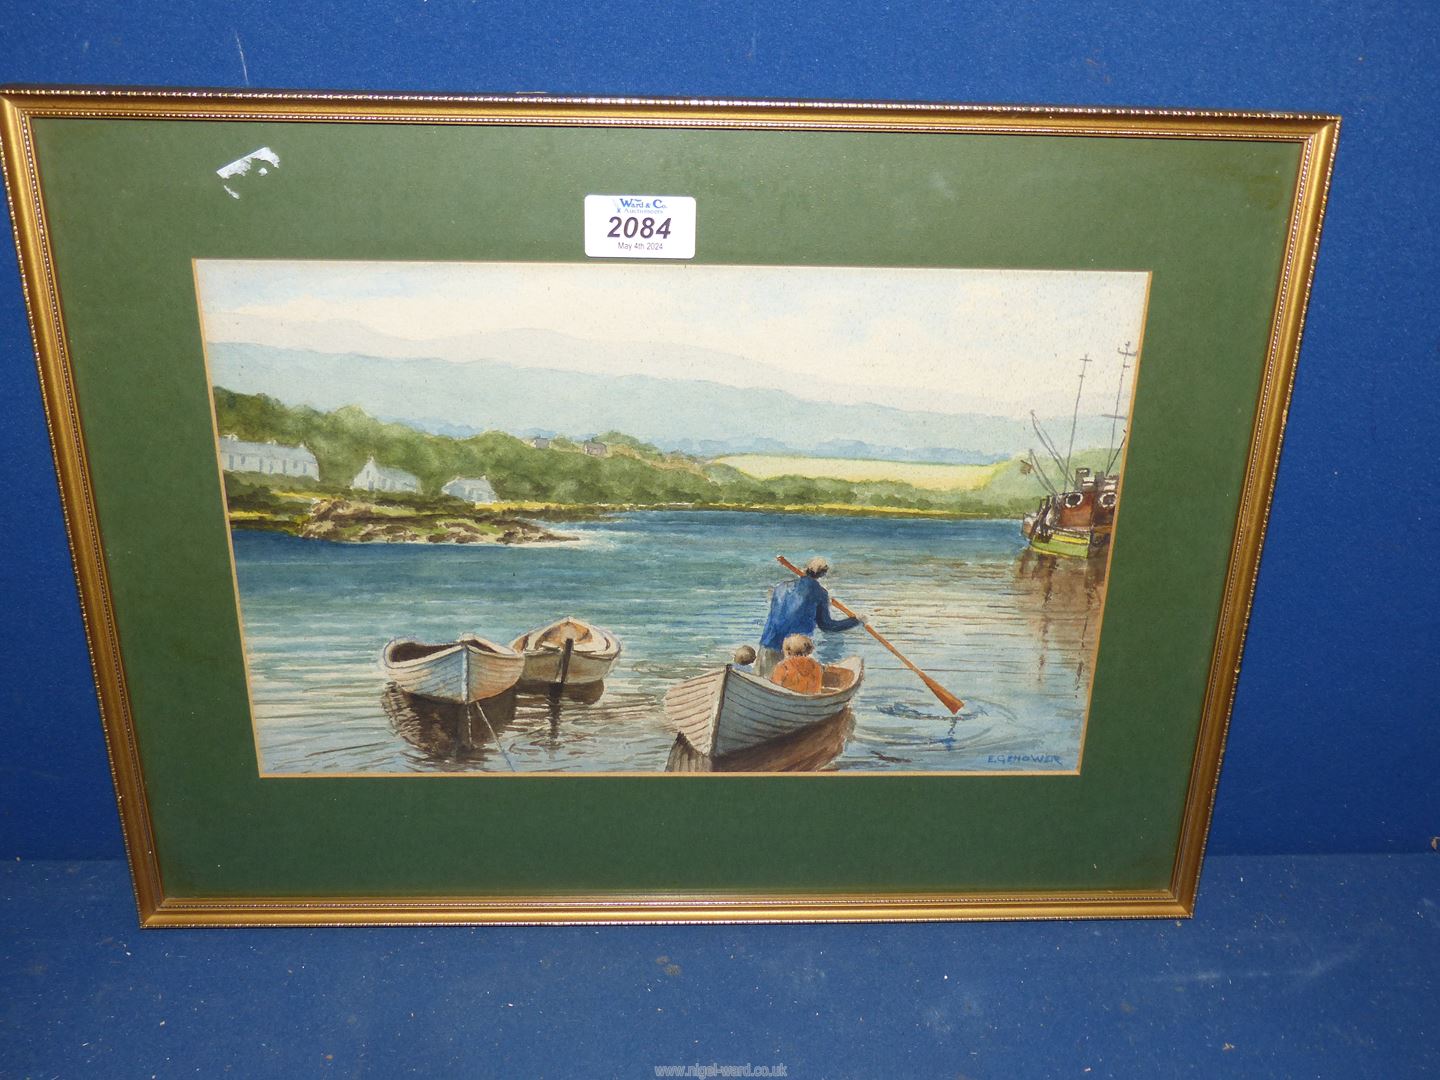 A framed and mounted Watercolour with figures in a Rowing boat, rolling hills in the background.